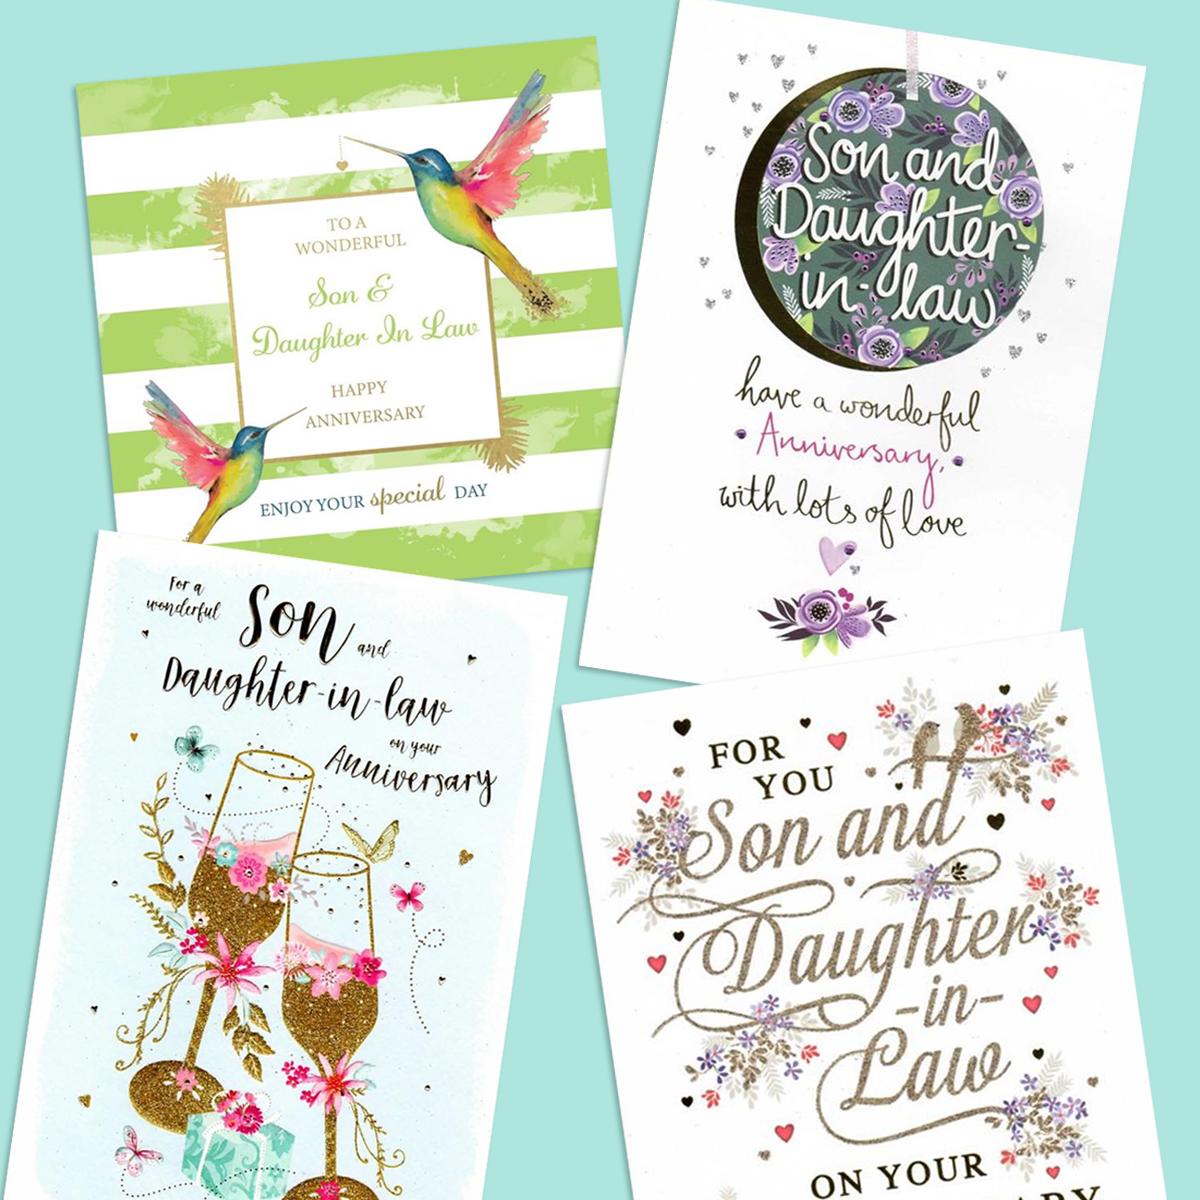 A Selection Of Cards To Show The Depth Of Range In Our Son & Daughter In Law Anniversary Section